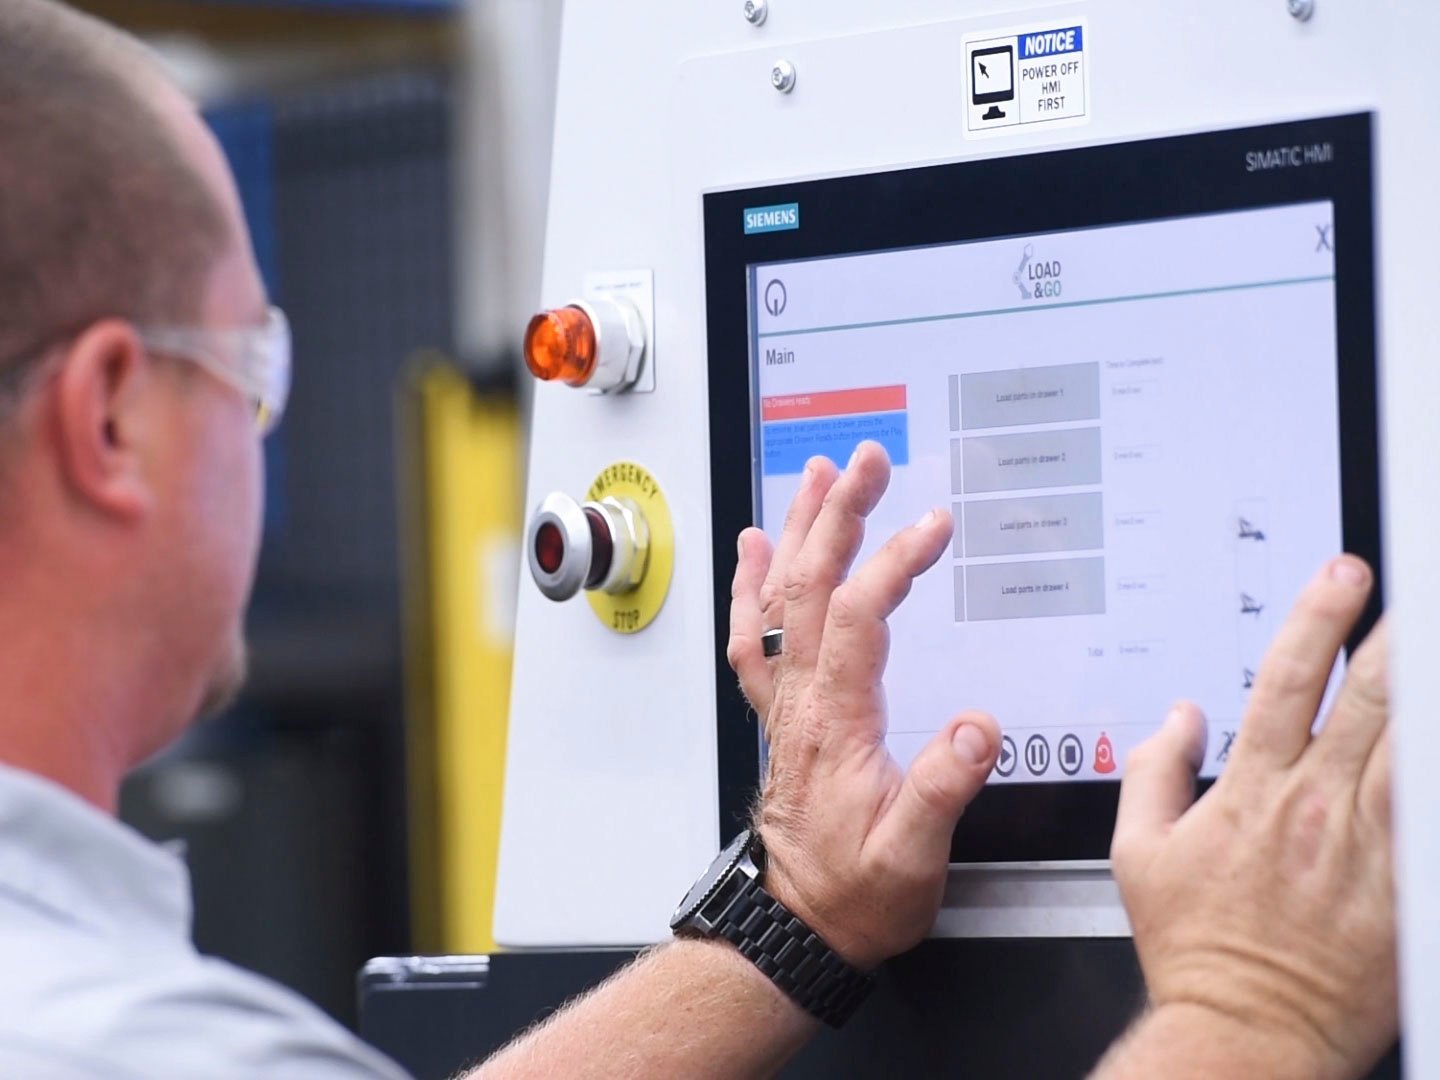 The Load & Go's user interface makes operating the machine easy.